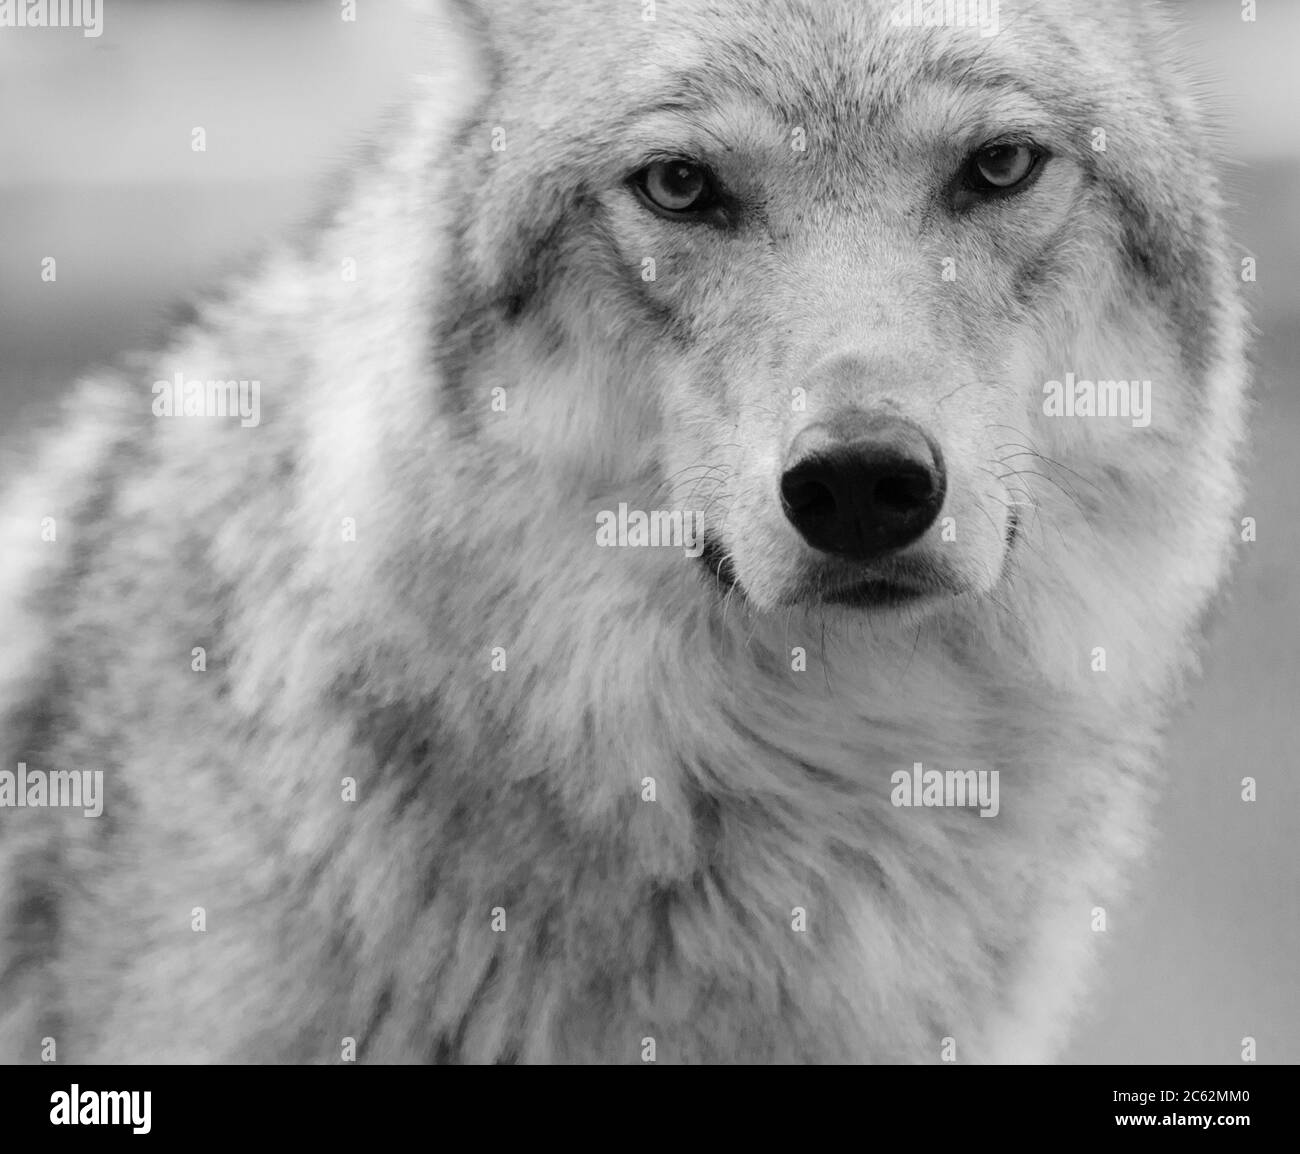 wolf portrait in black and white tones Stock Photo